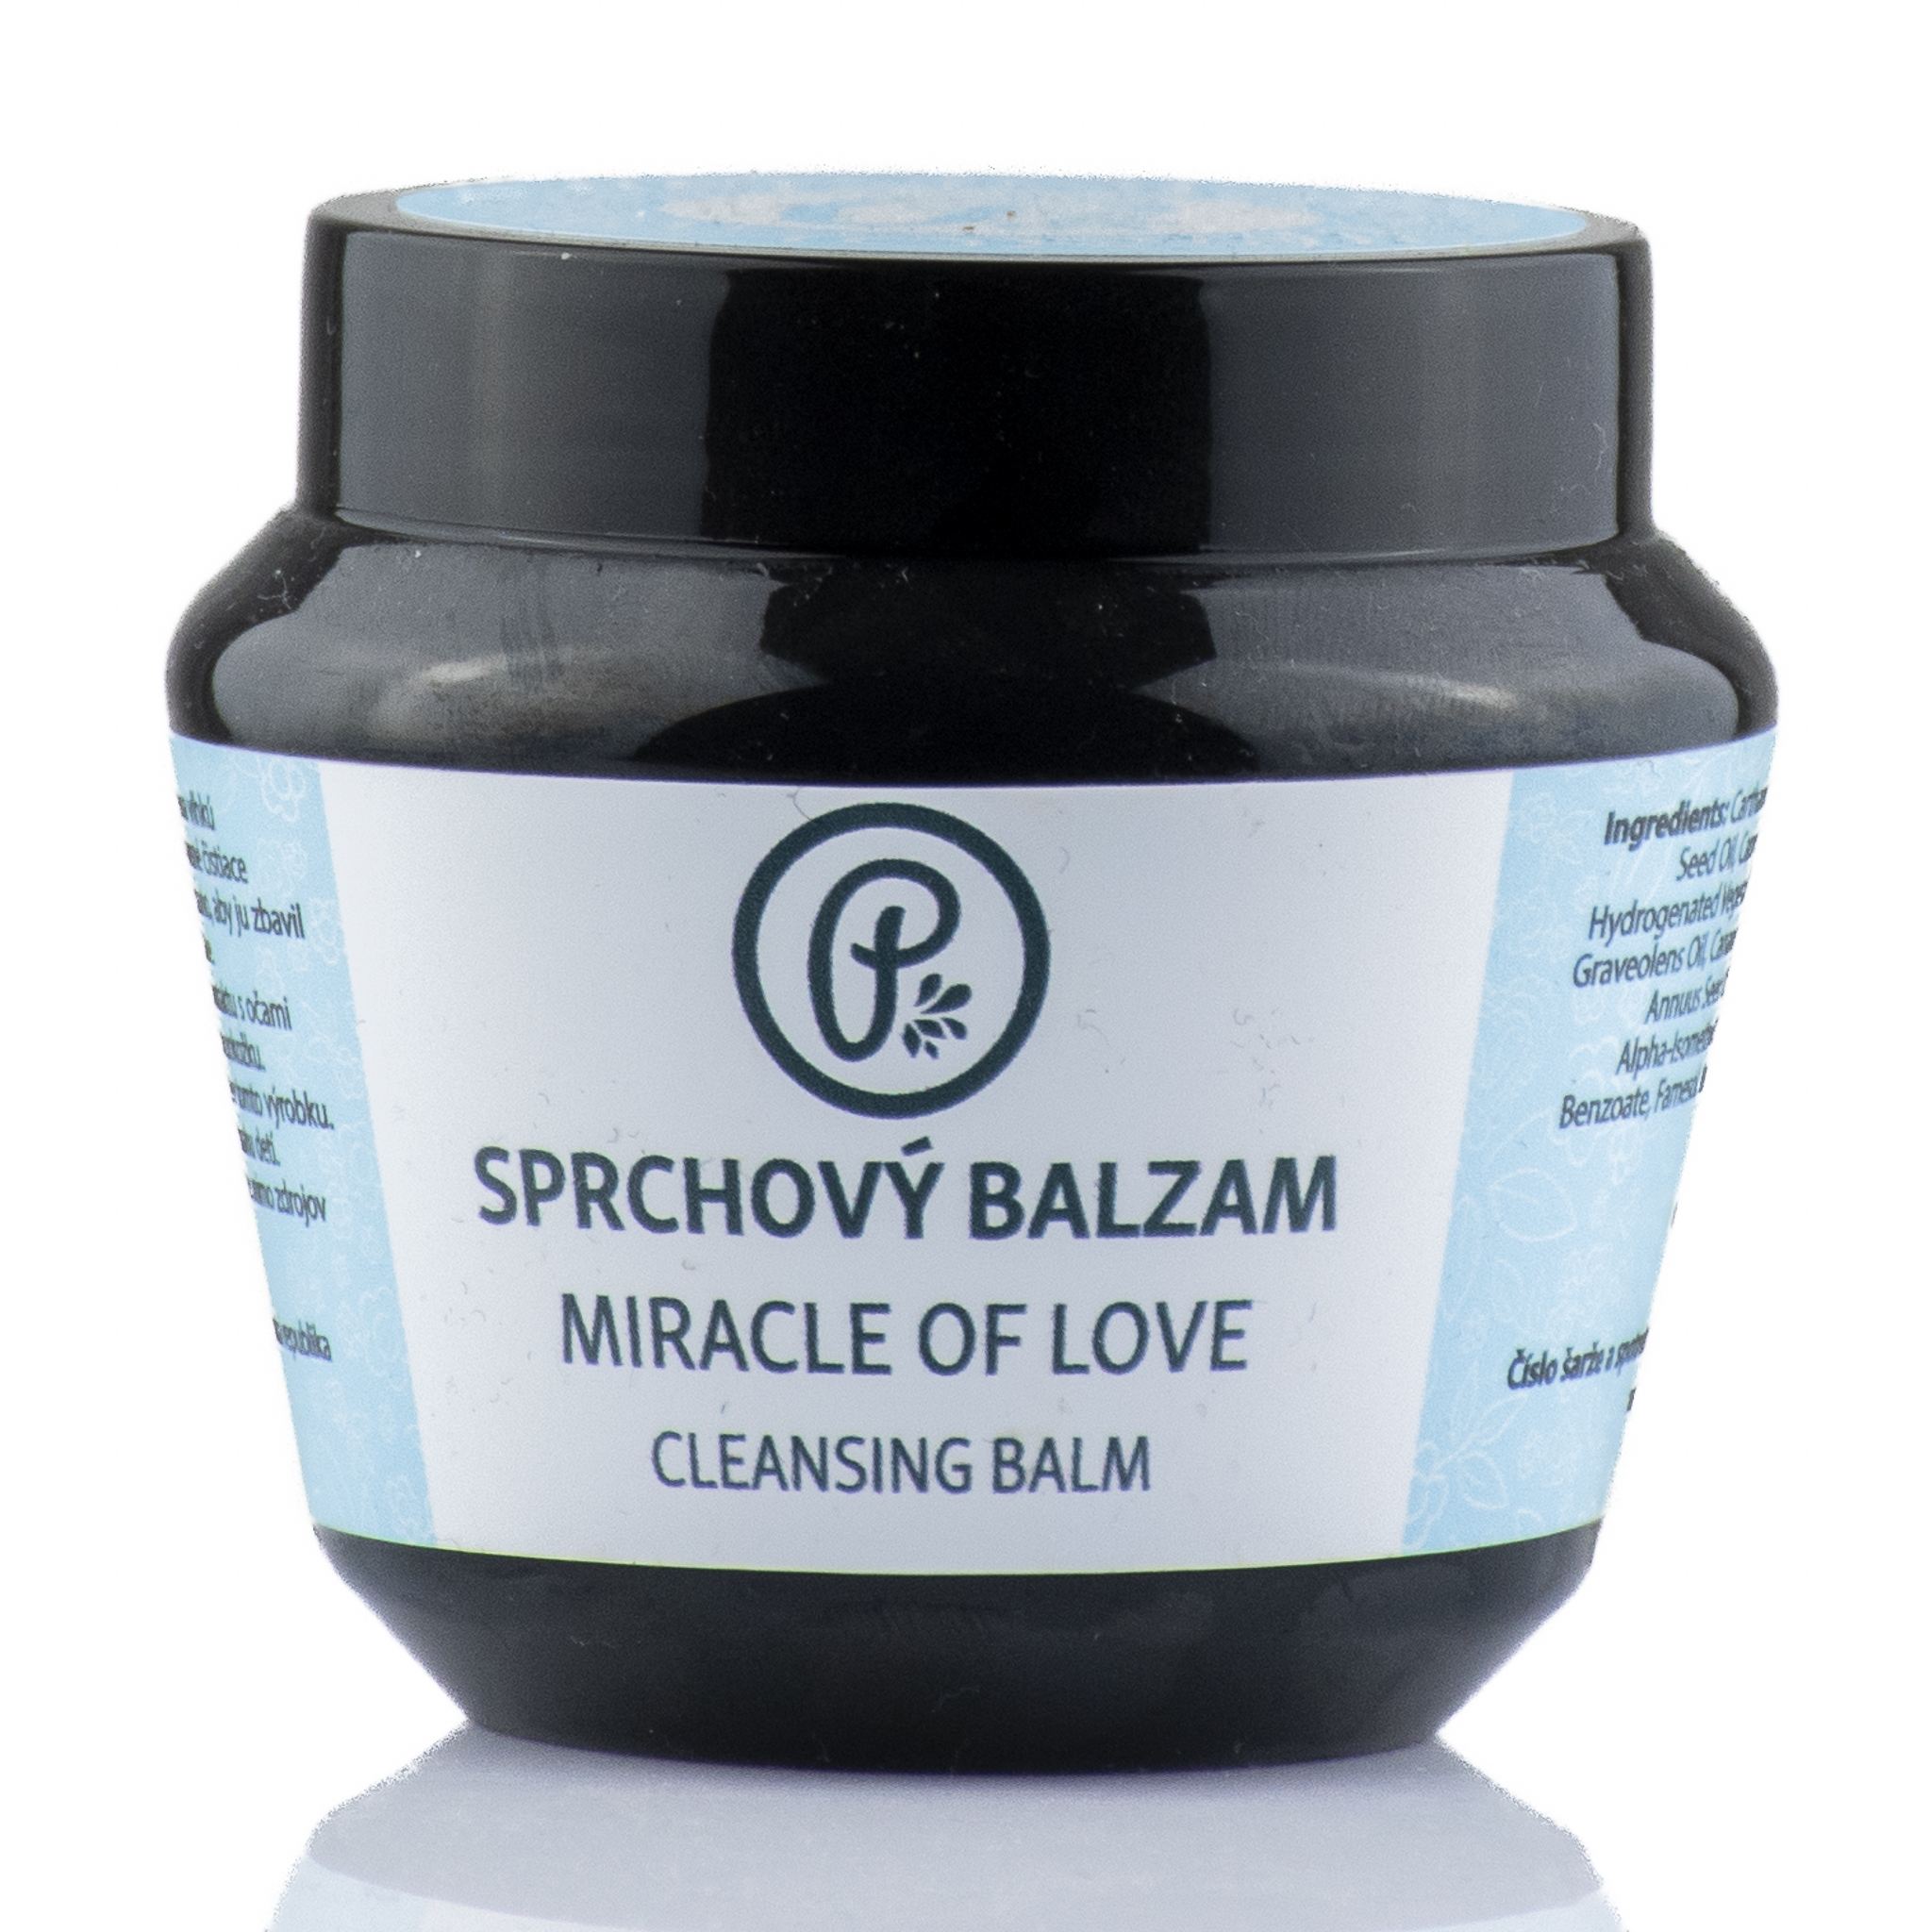 PANAKEIA Cleansing balm – MIRACLE OF LOVE, sprchový balzam 150ml